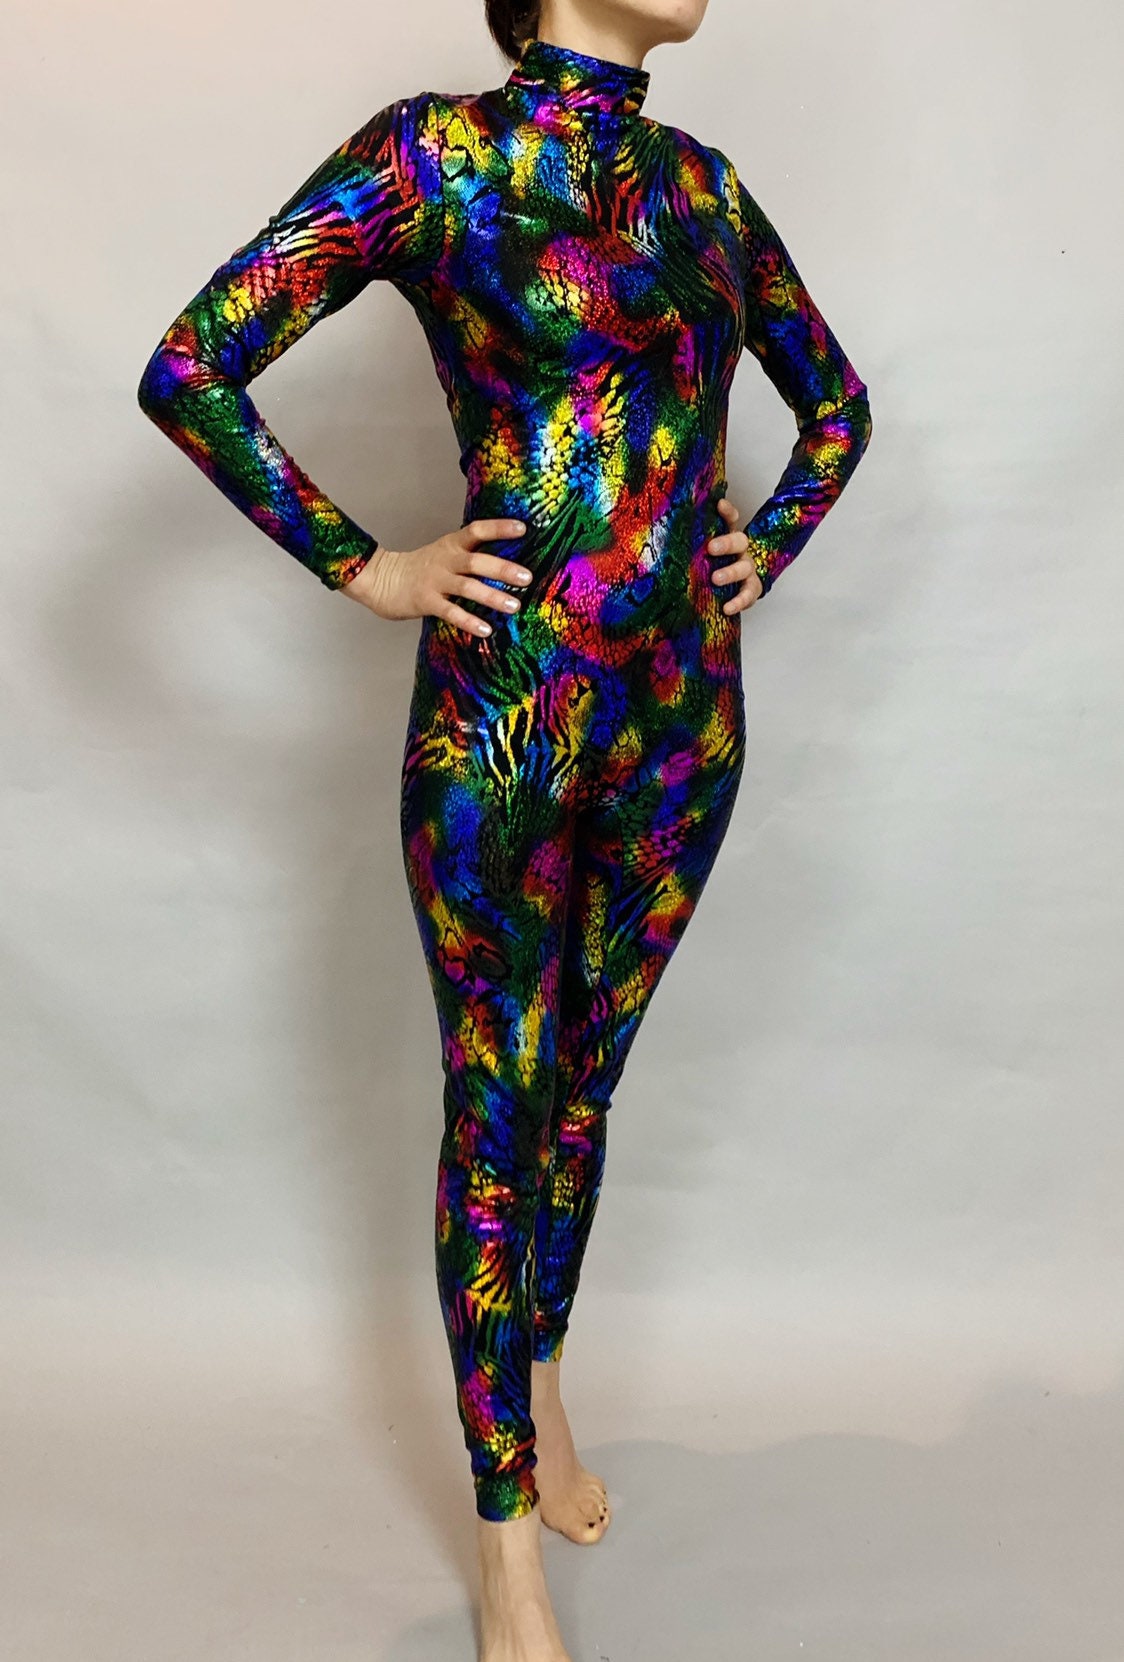 Spandex Catsuit Contortion Jumpsuit Costume for Circus | Etsy